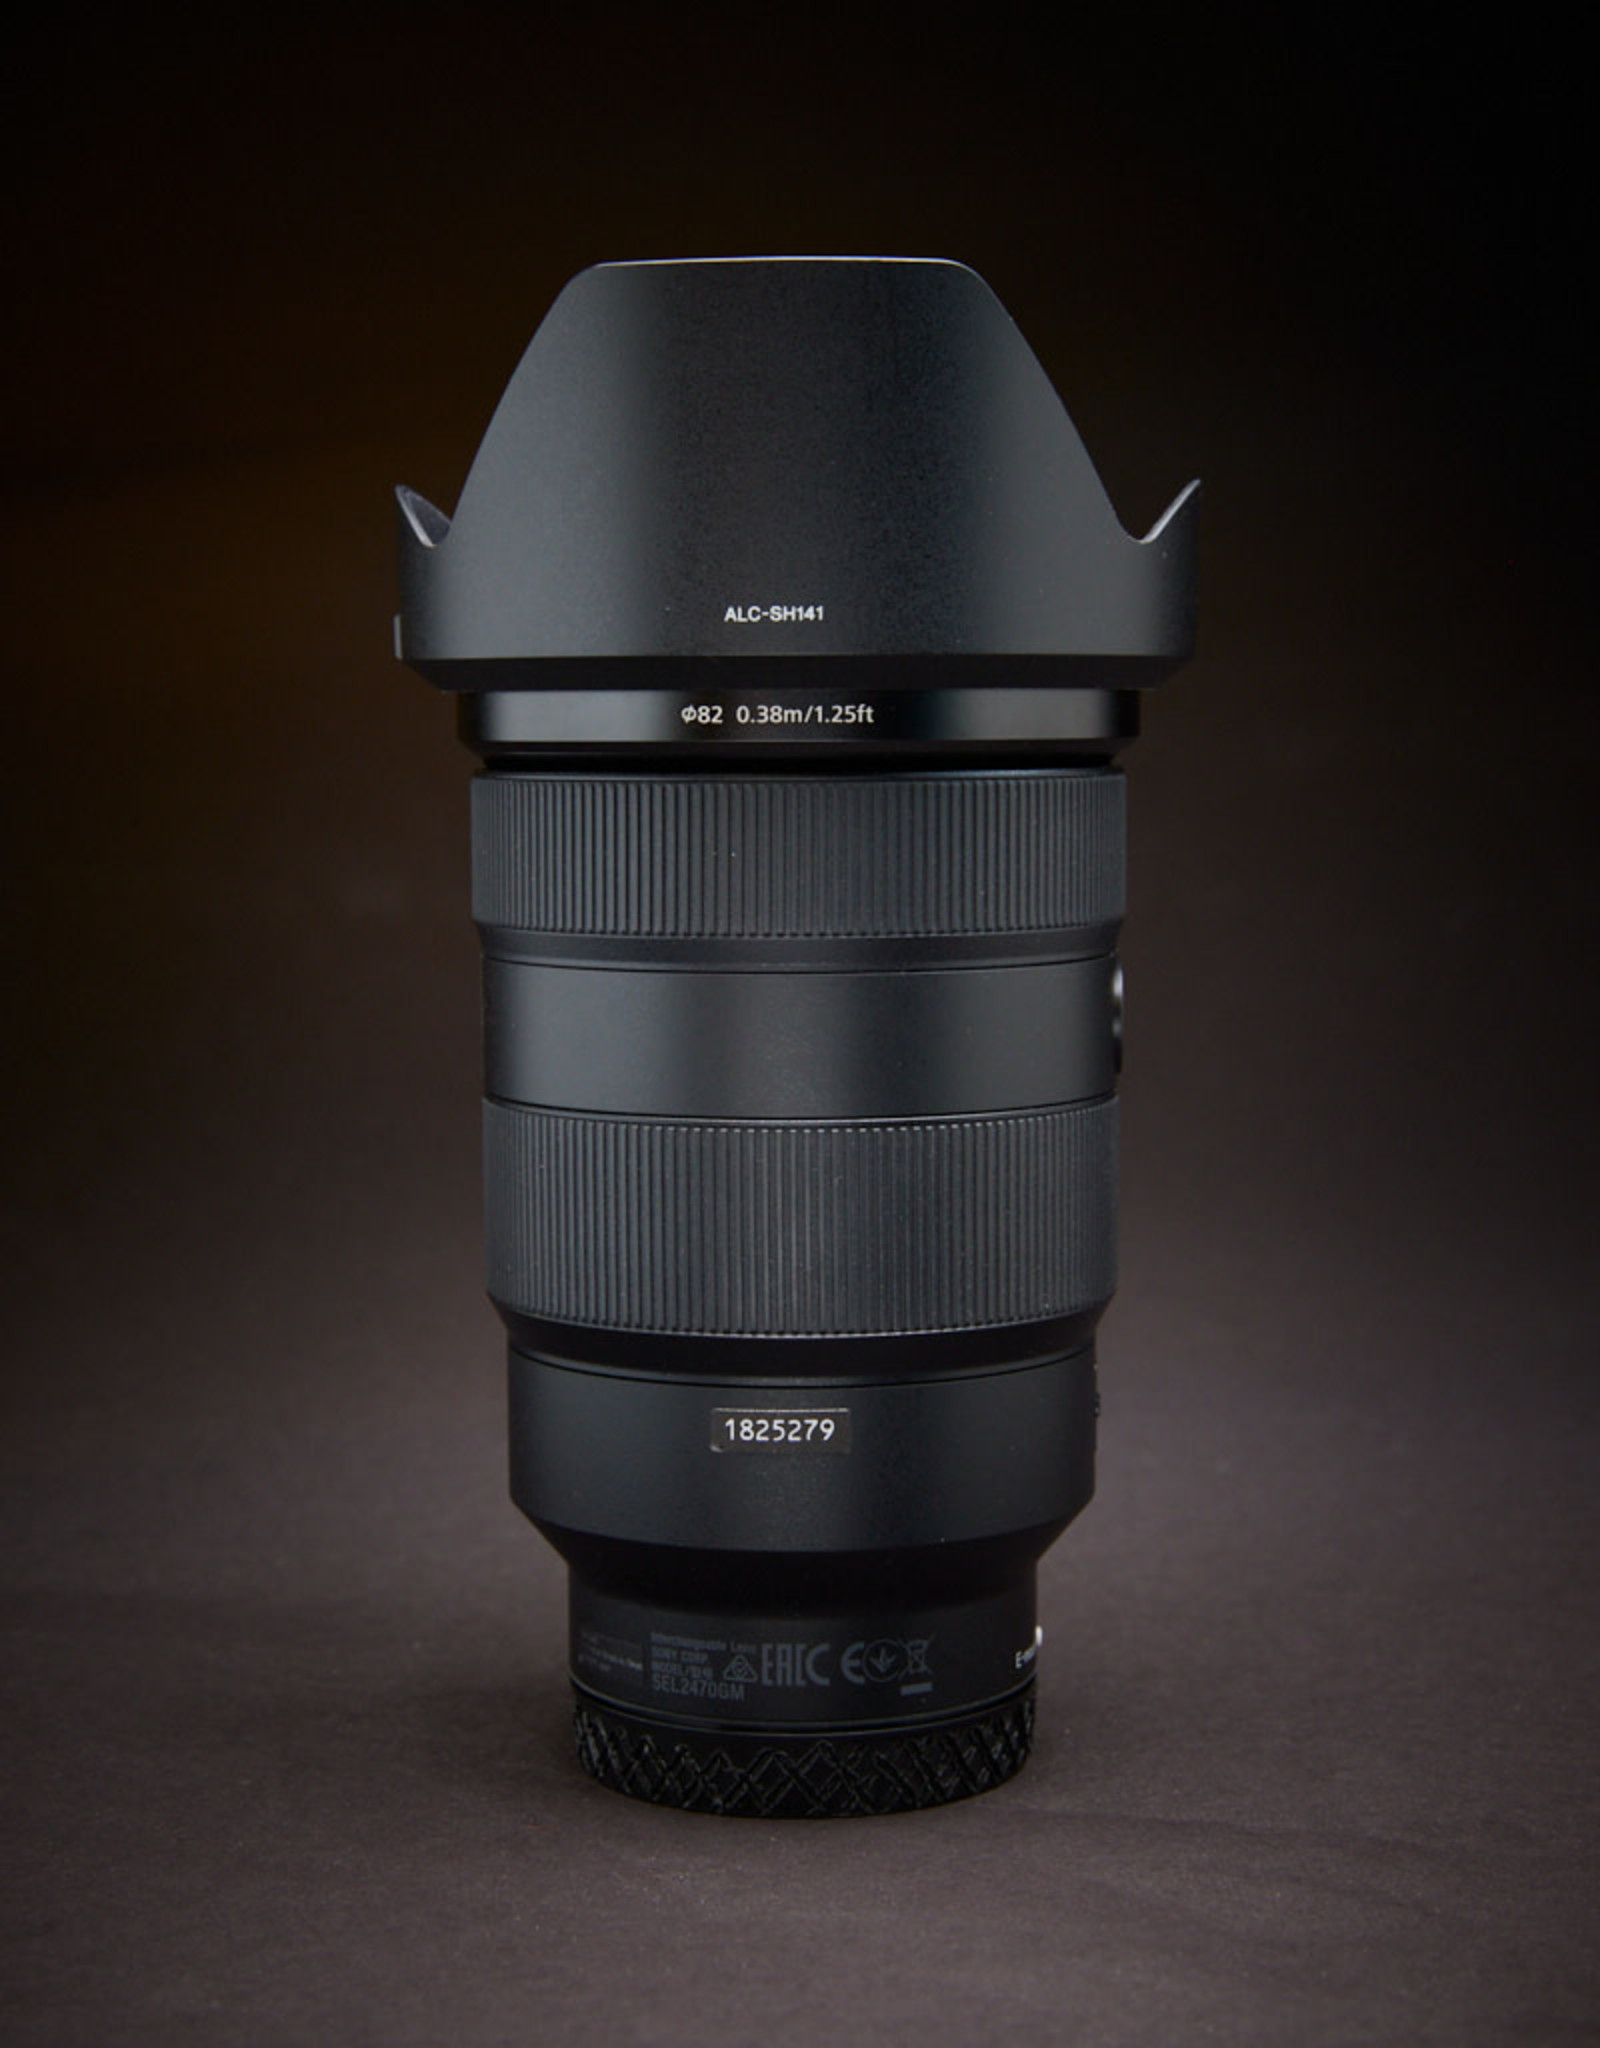 USED - Sony FE 24-70mm f/2.8 GM Lens with hood, caps, lens case and original box. Condition 9